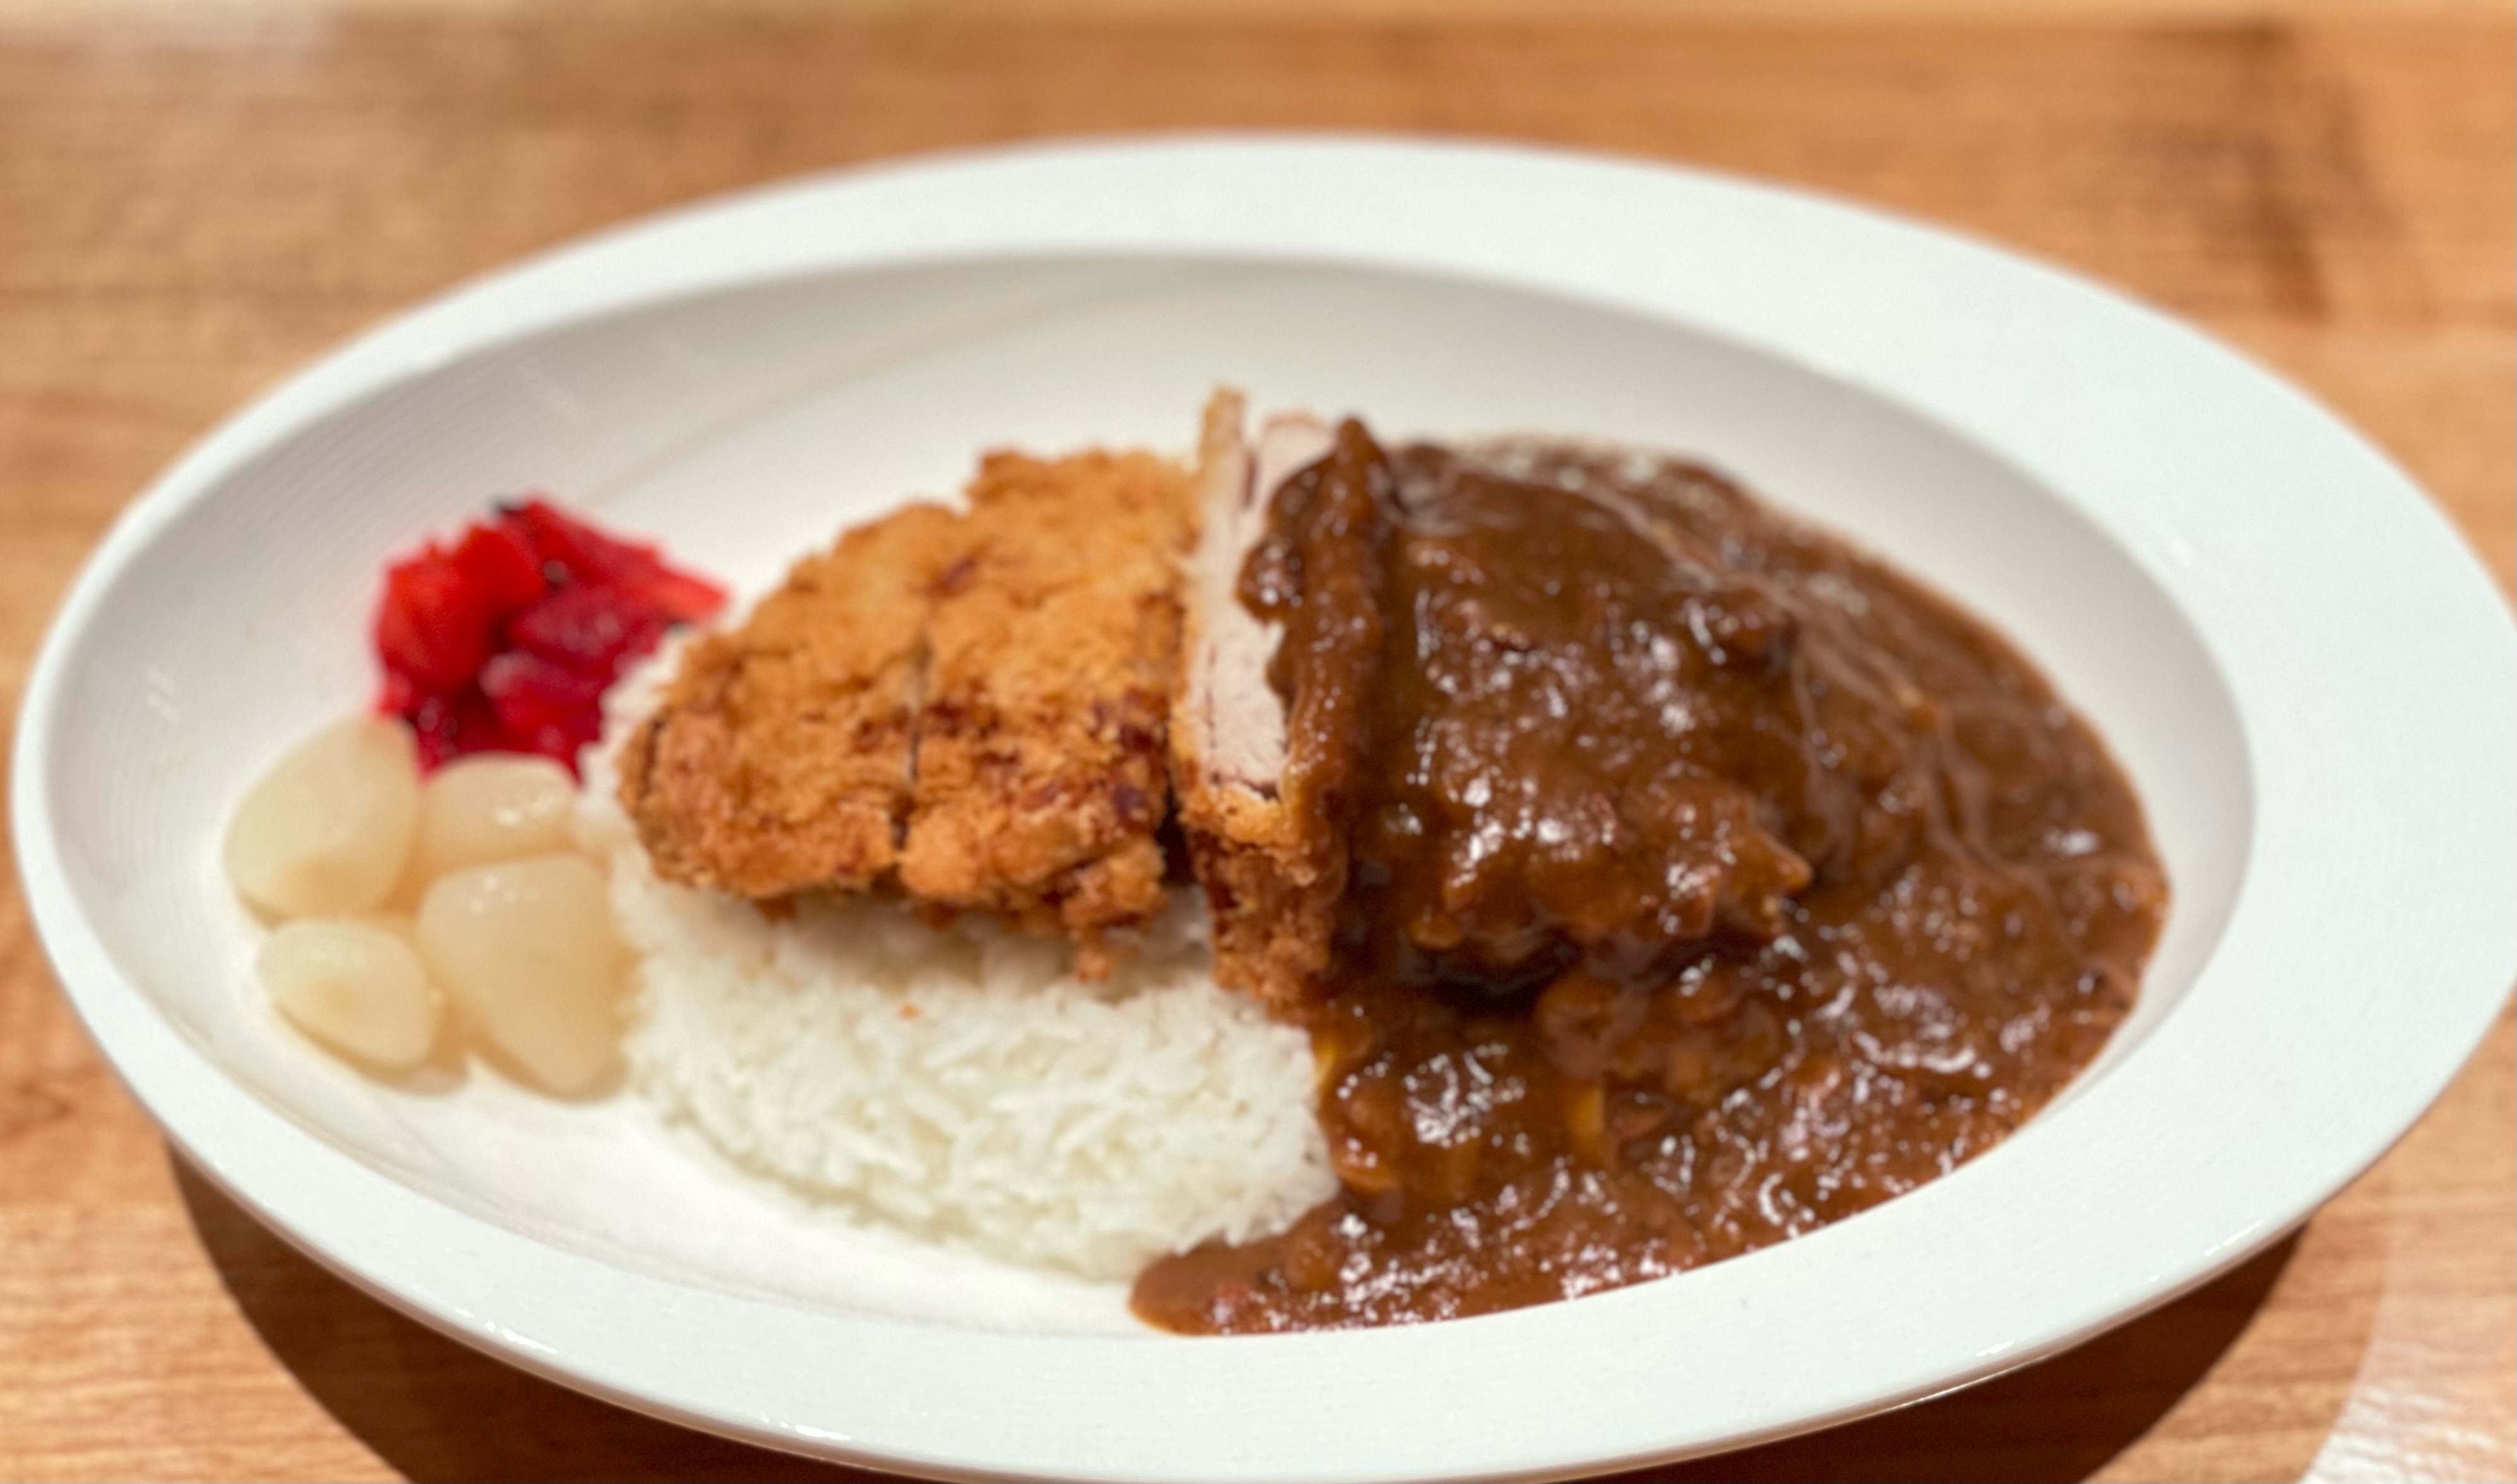 A plate of katsu curry: Crispy breaded fried pork on the left; dark, rich beef-based curry gravy on the right